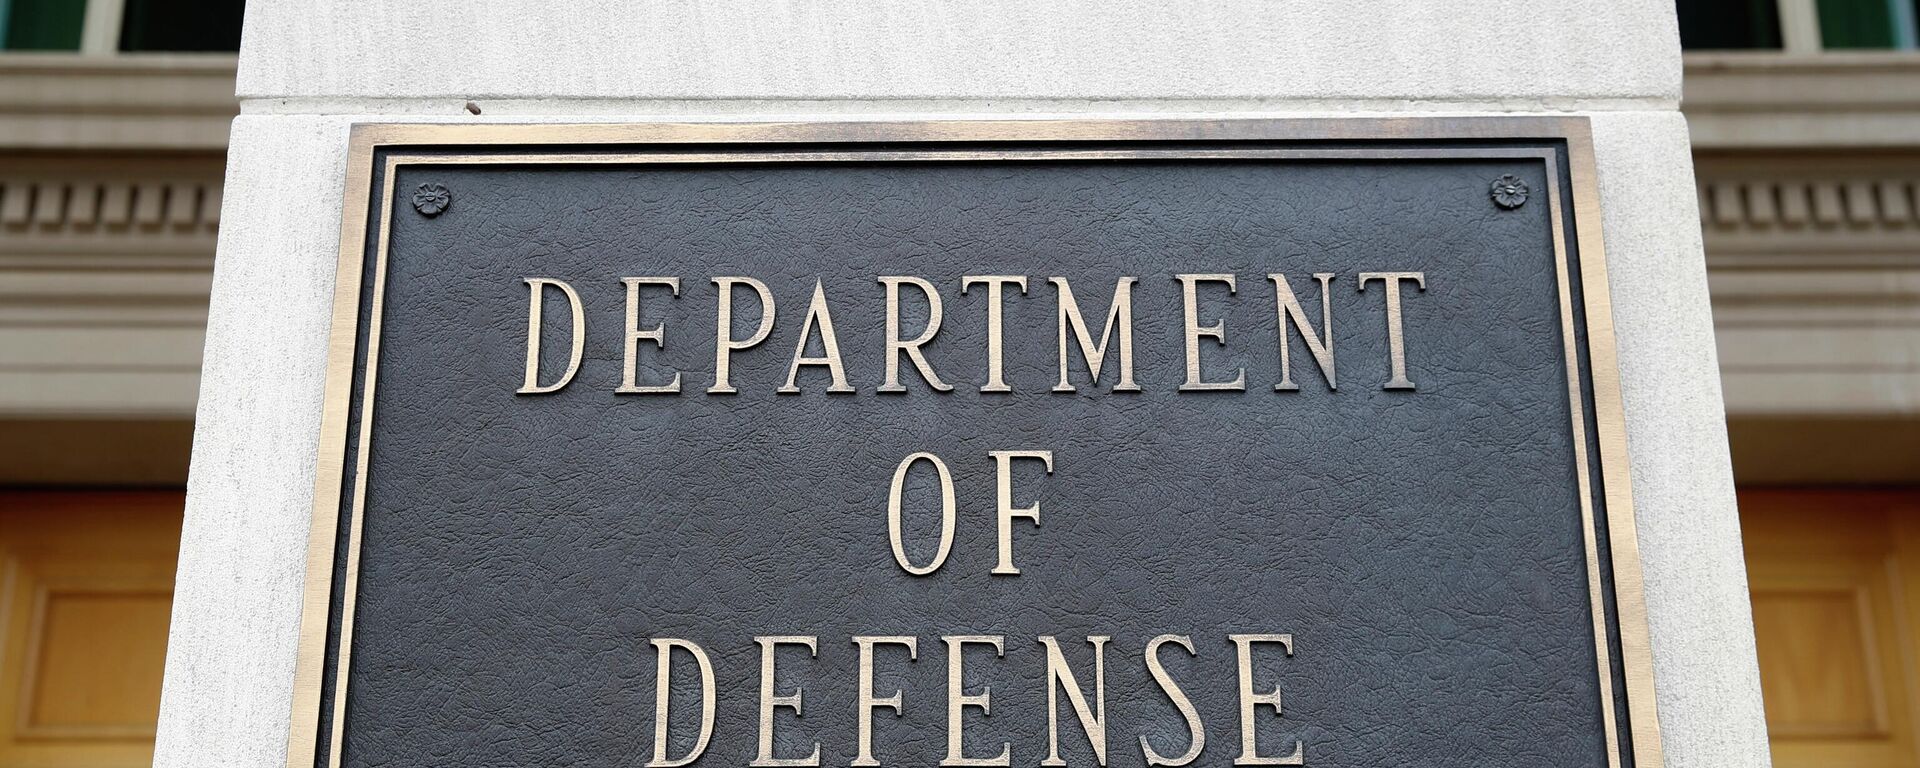 This April 19, 2019 file photo shows a sign for the Department of Defense at the Pentagon in Washington.  - Sputnik International, 1920, 16.09.2022